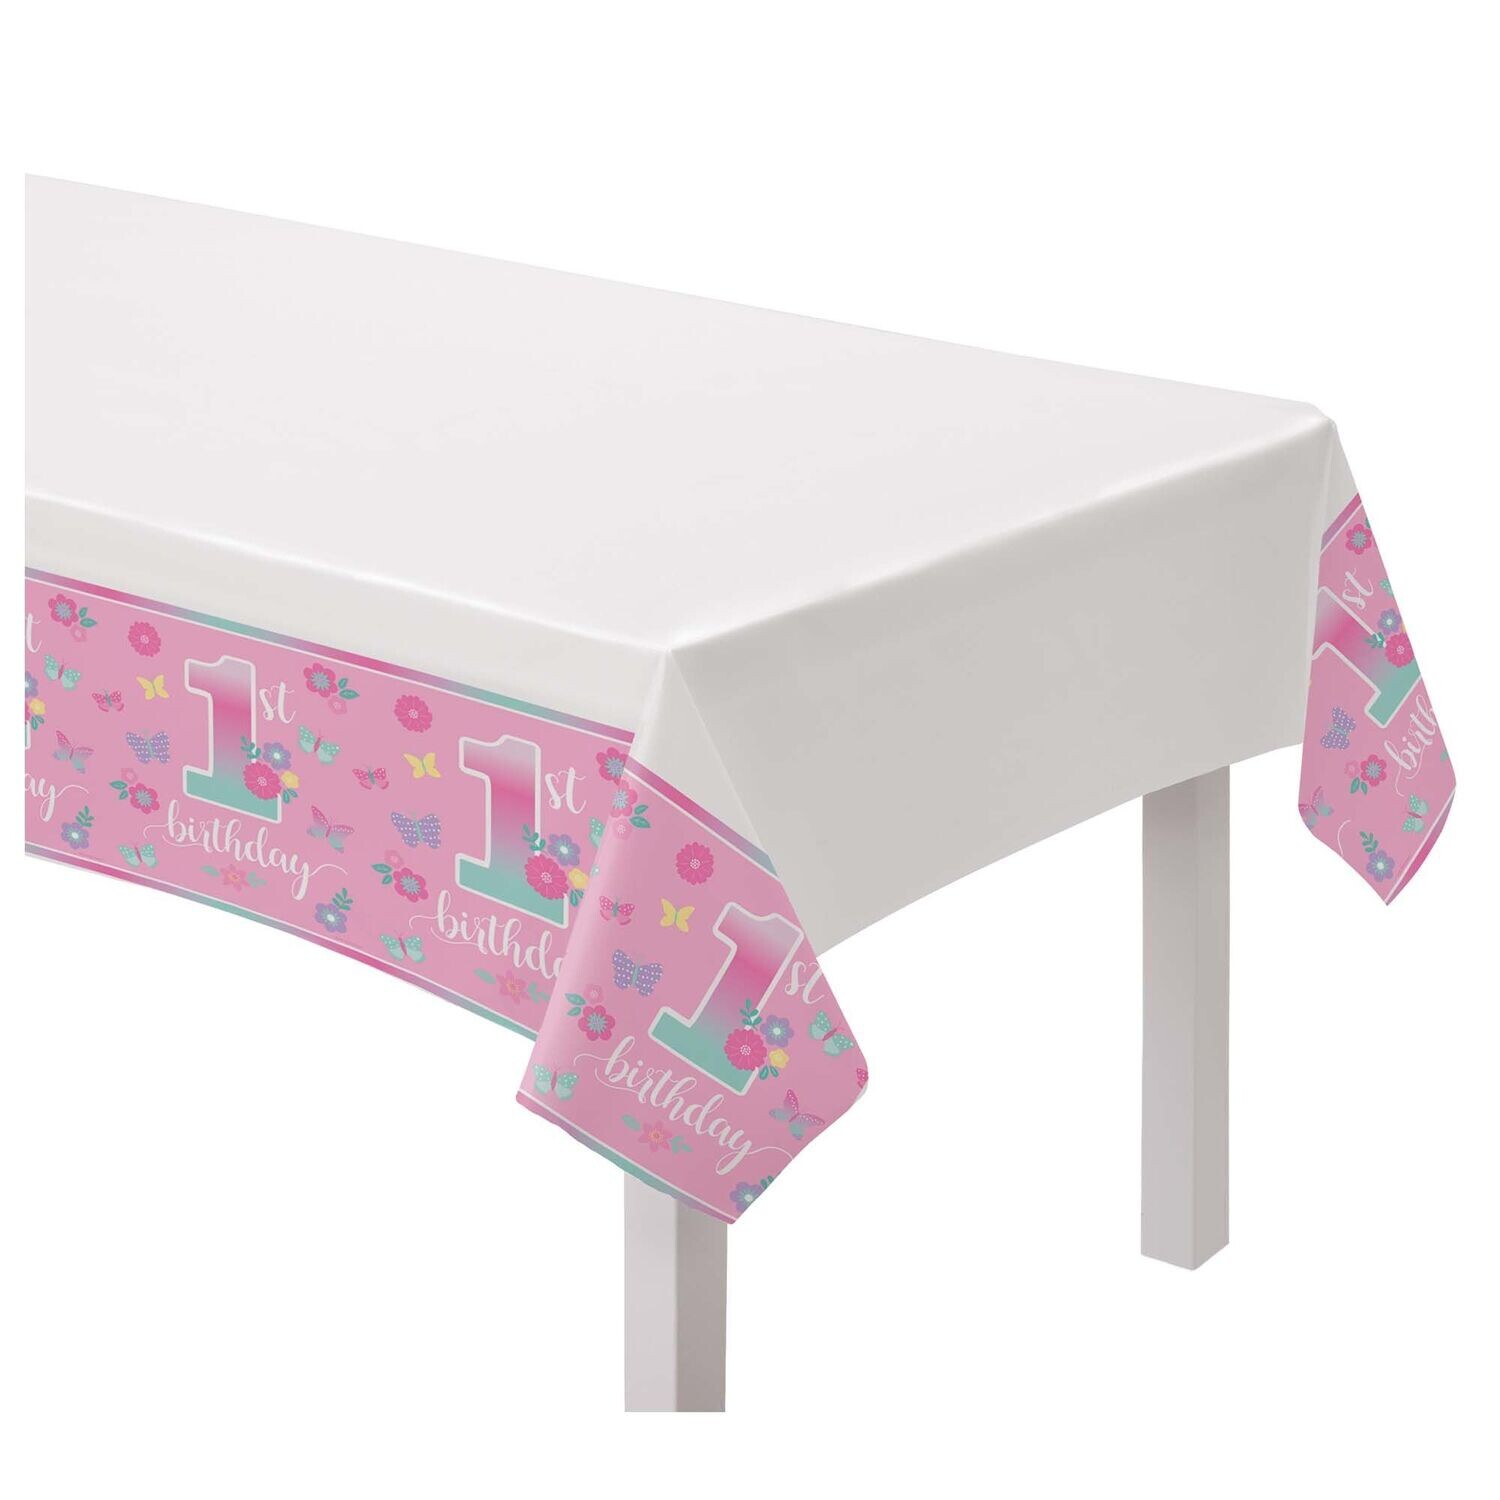 Butterfly Garden 1st Birthday Table cover